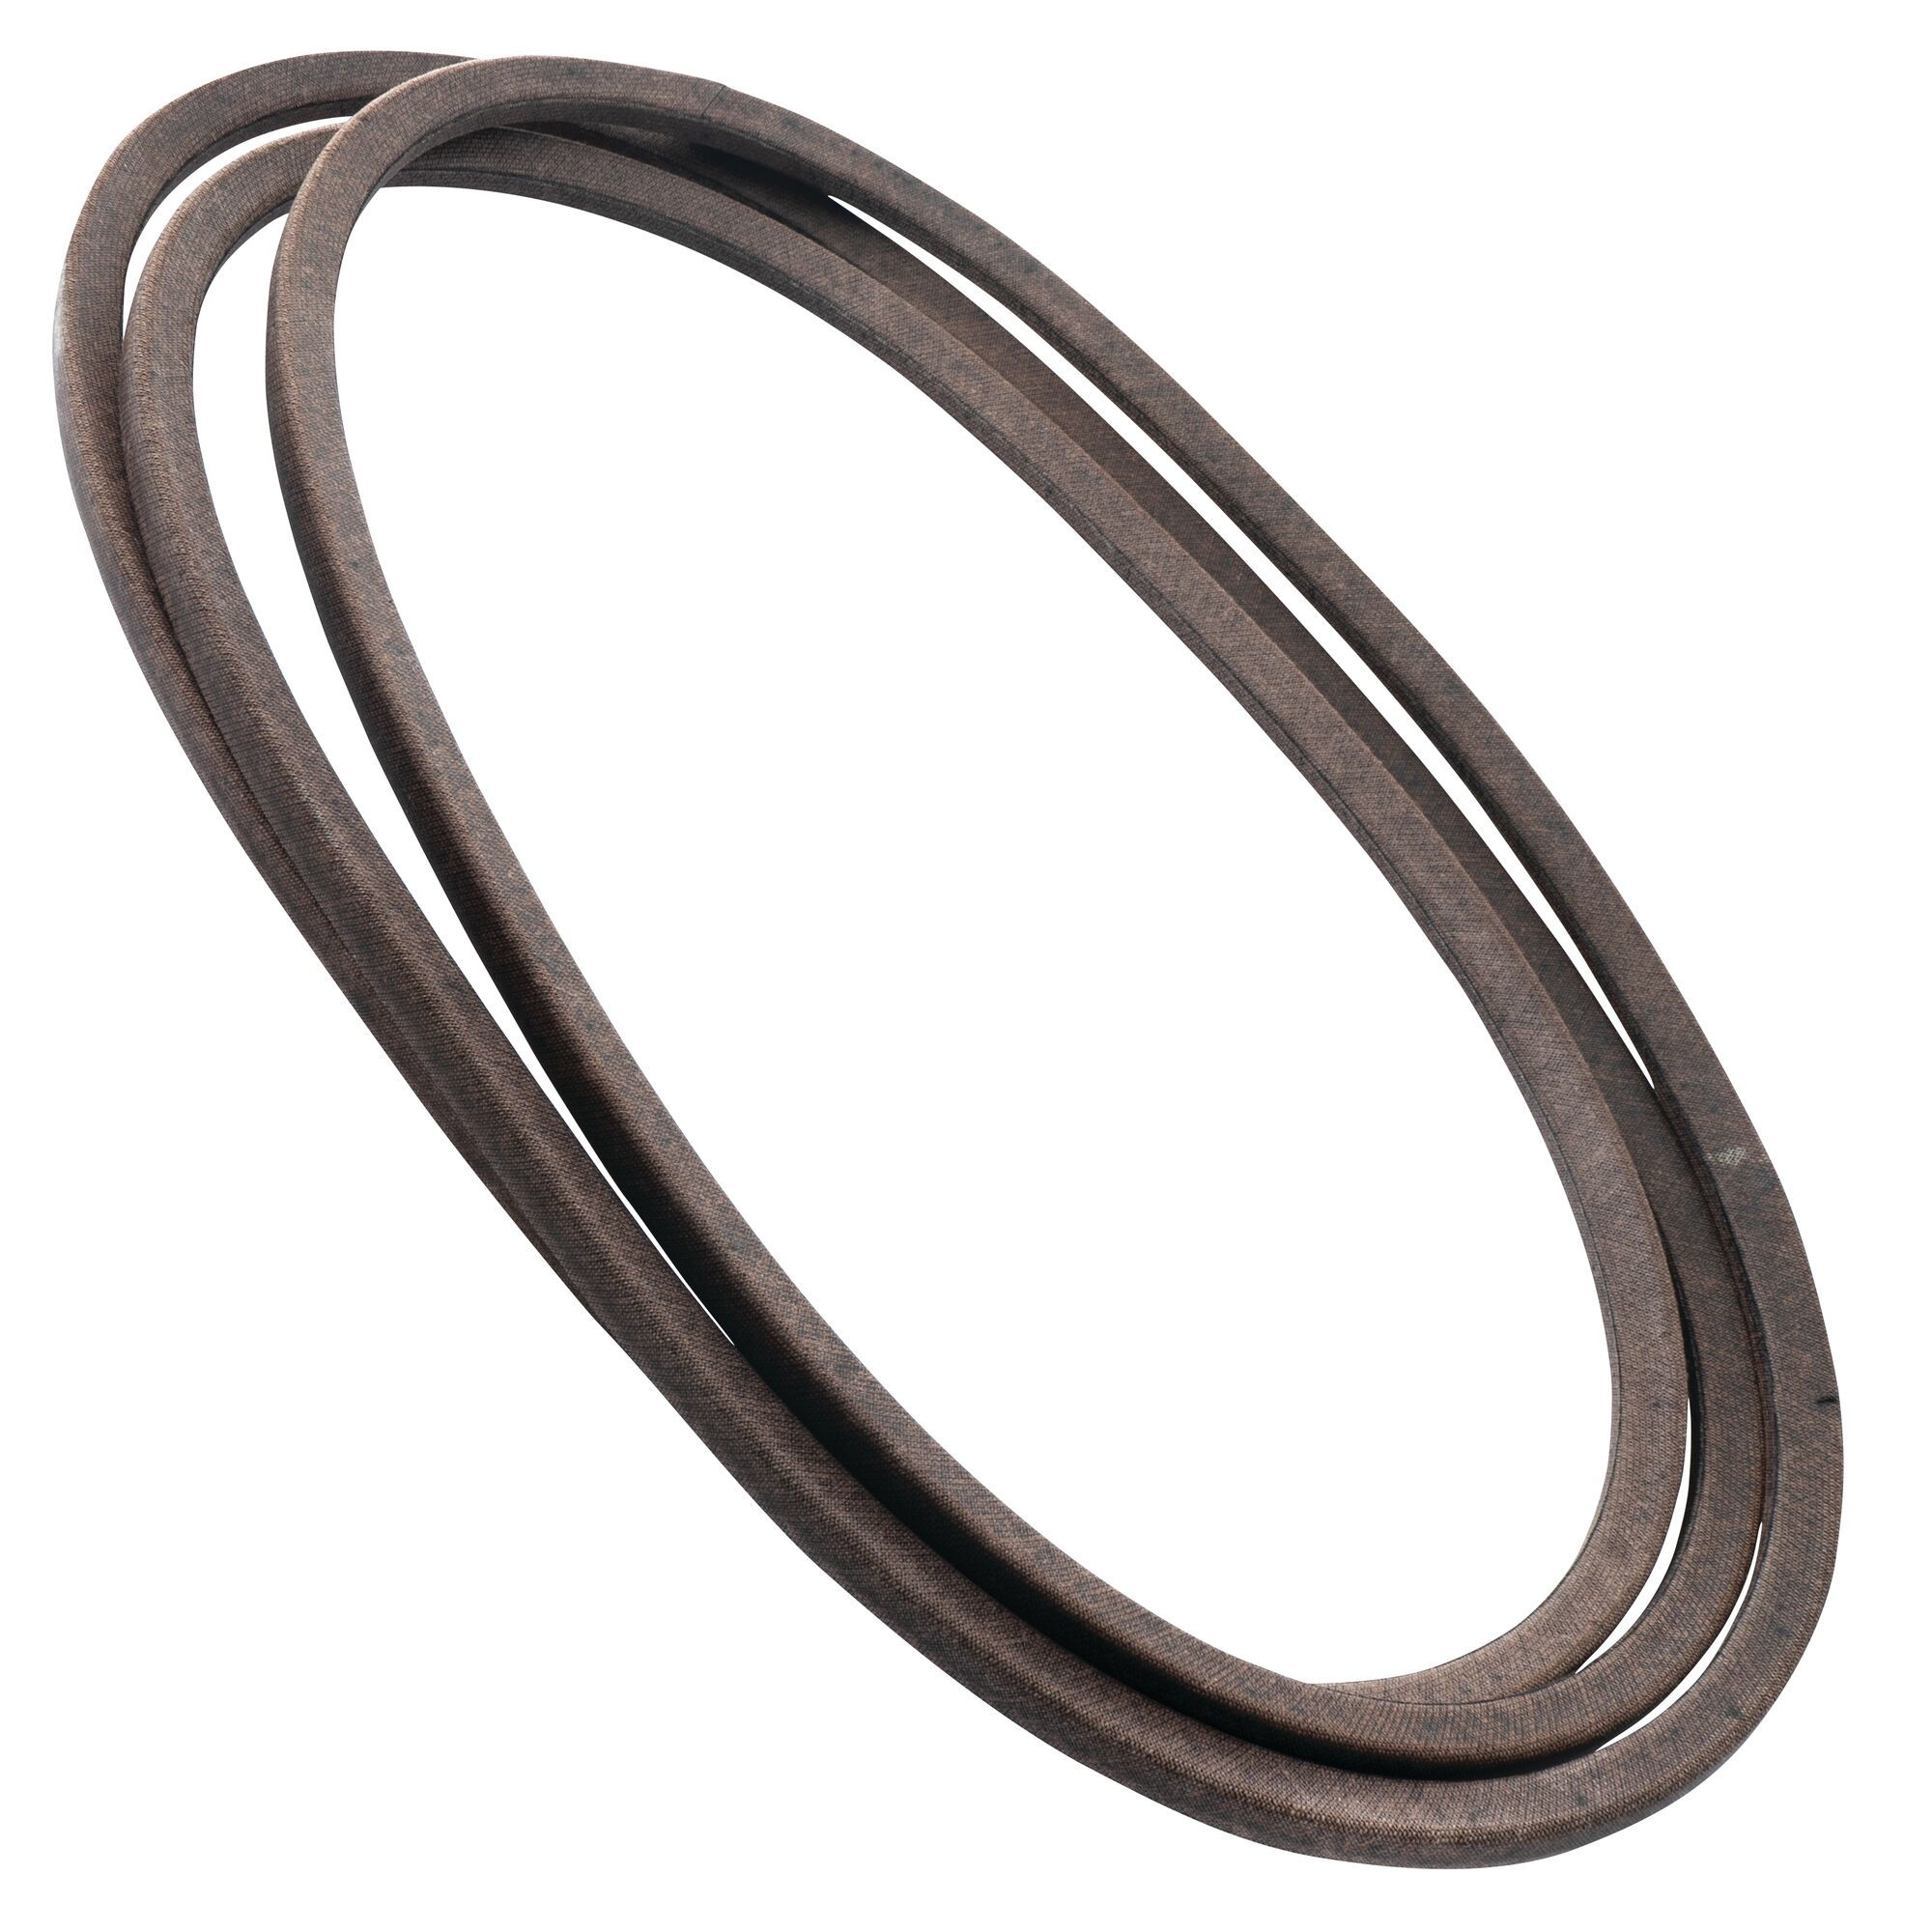 Right profile of 42 inch deck drive belt.